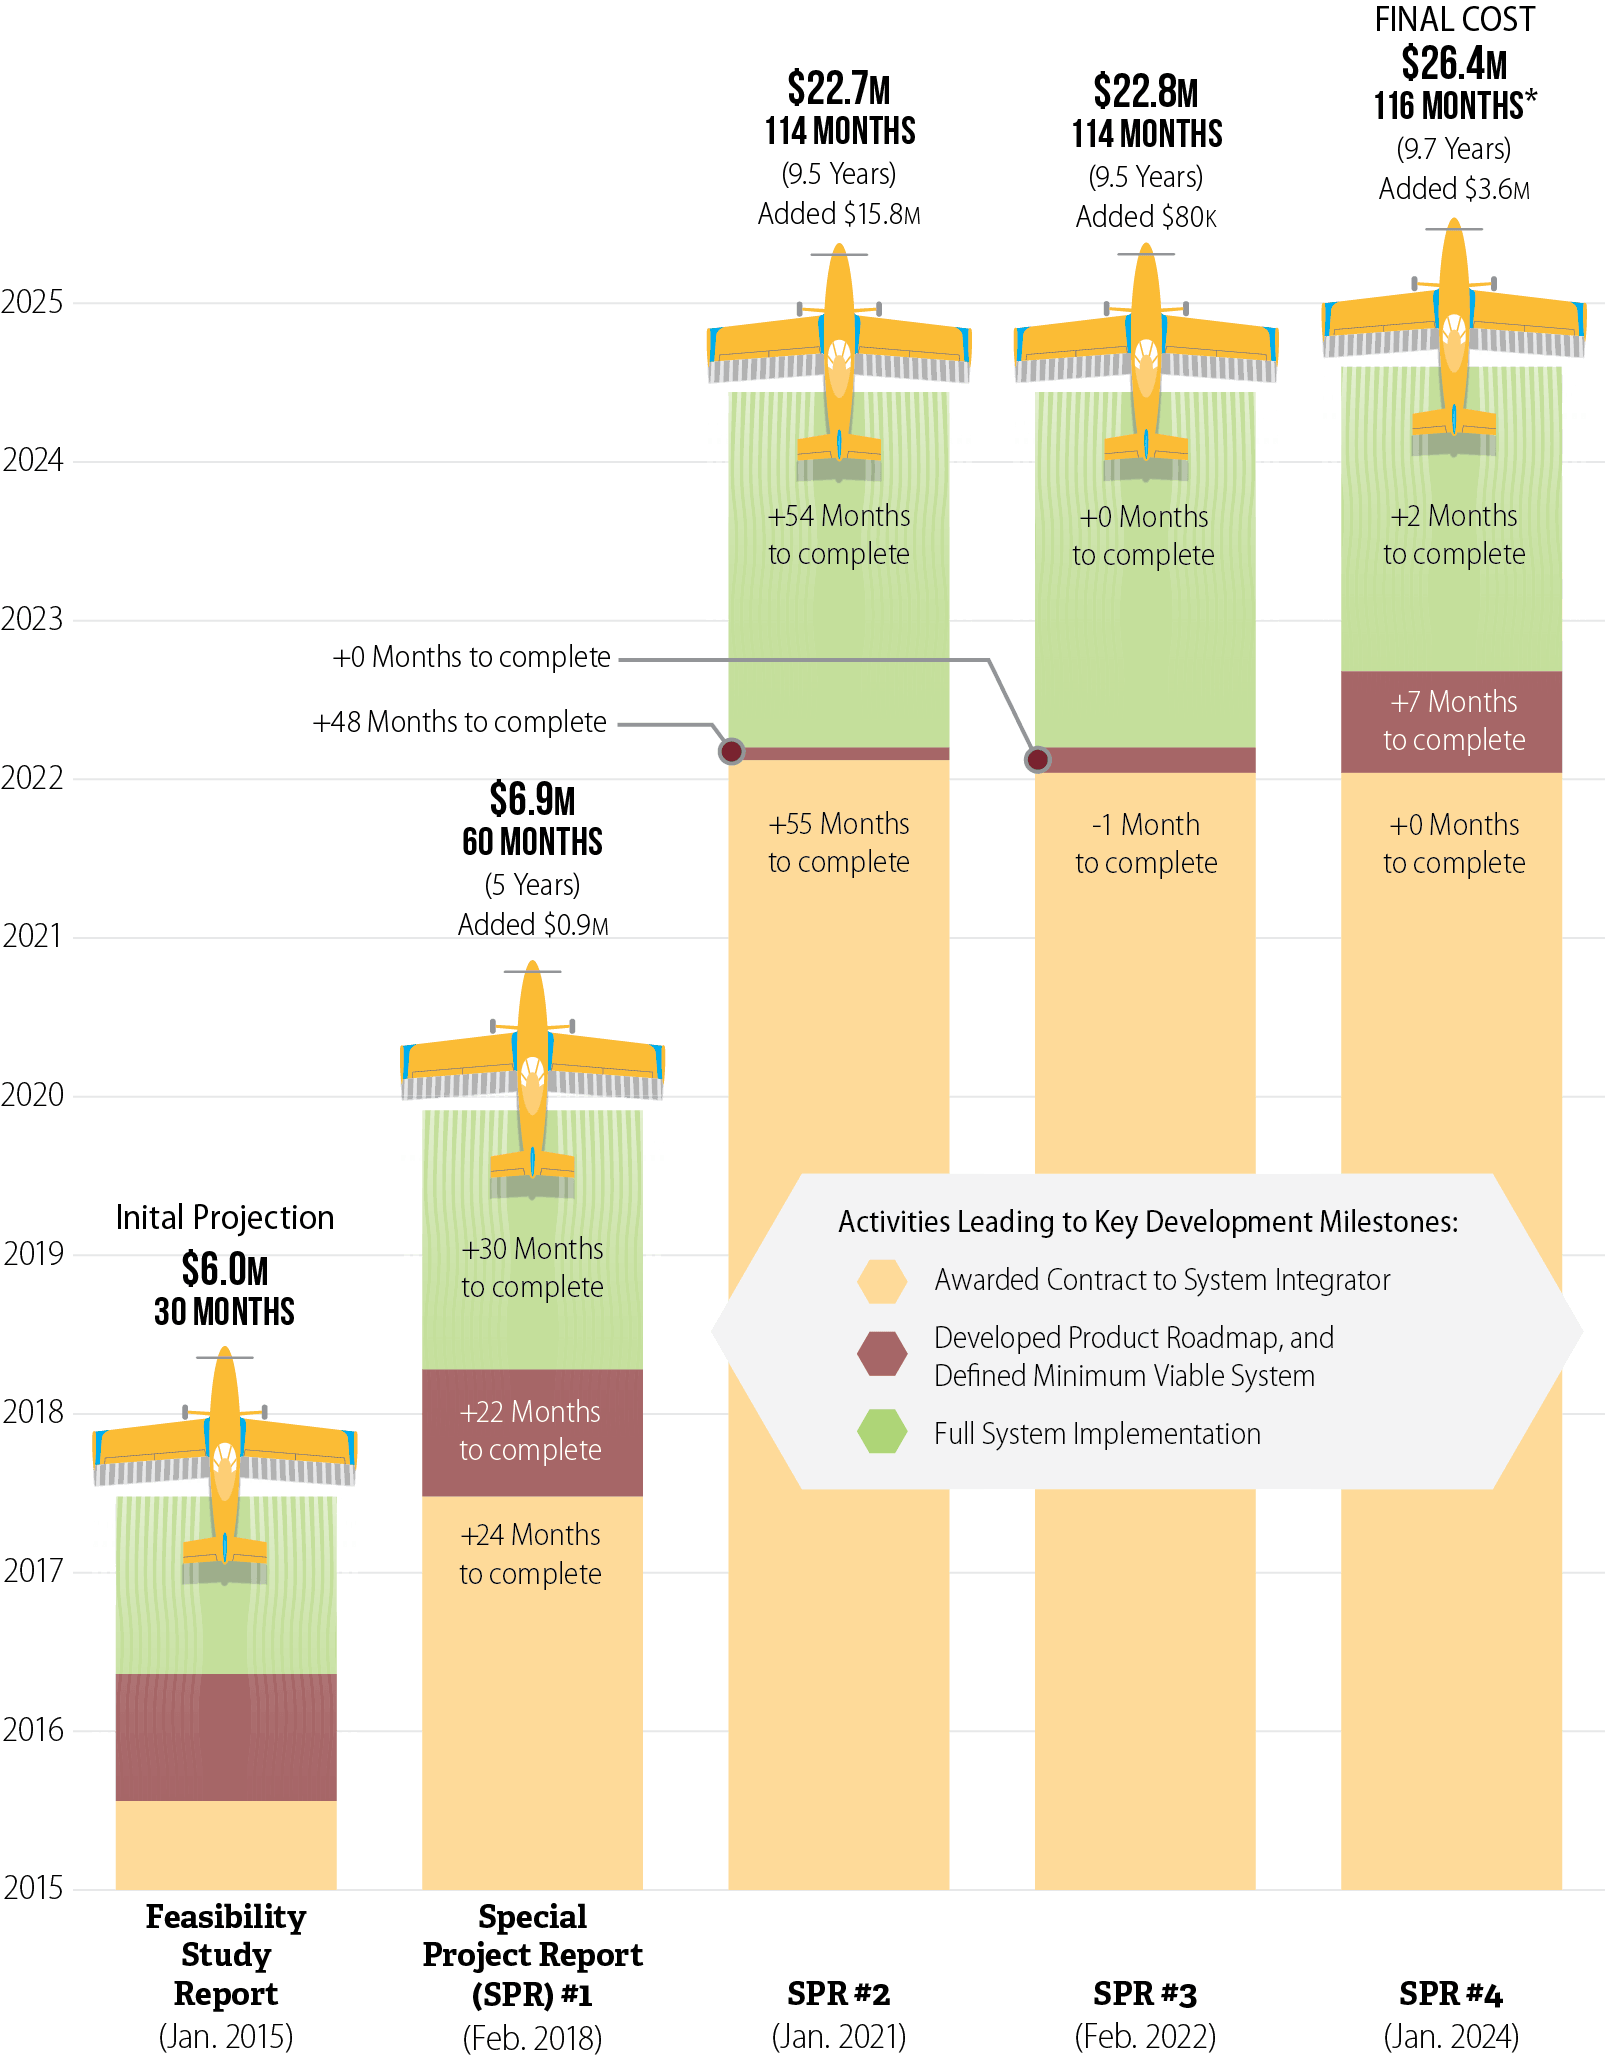 This figure is a stylized bar chart showing the increases in schedule and cost for the development of CalPEST through five stages of the project’s development.